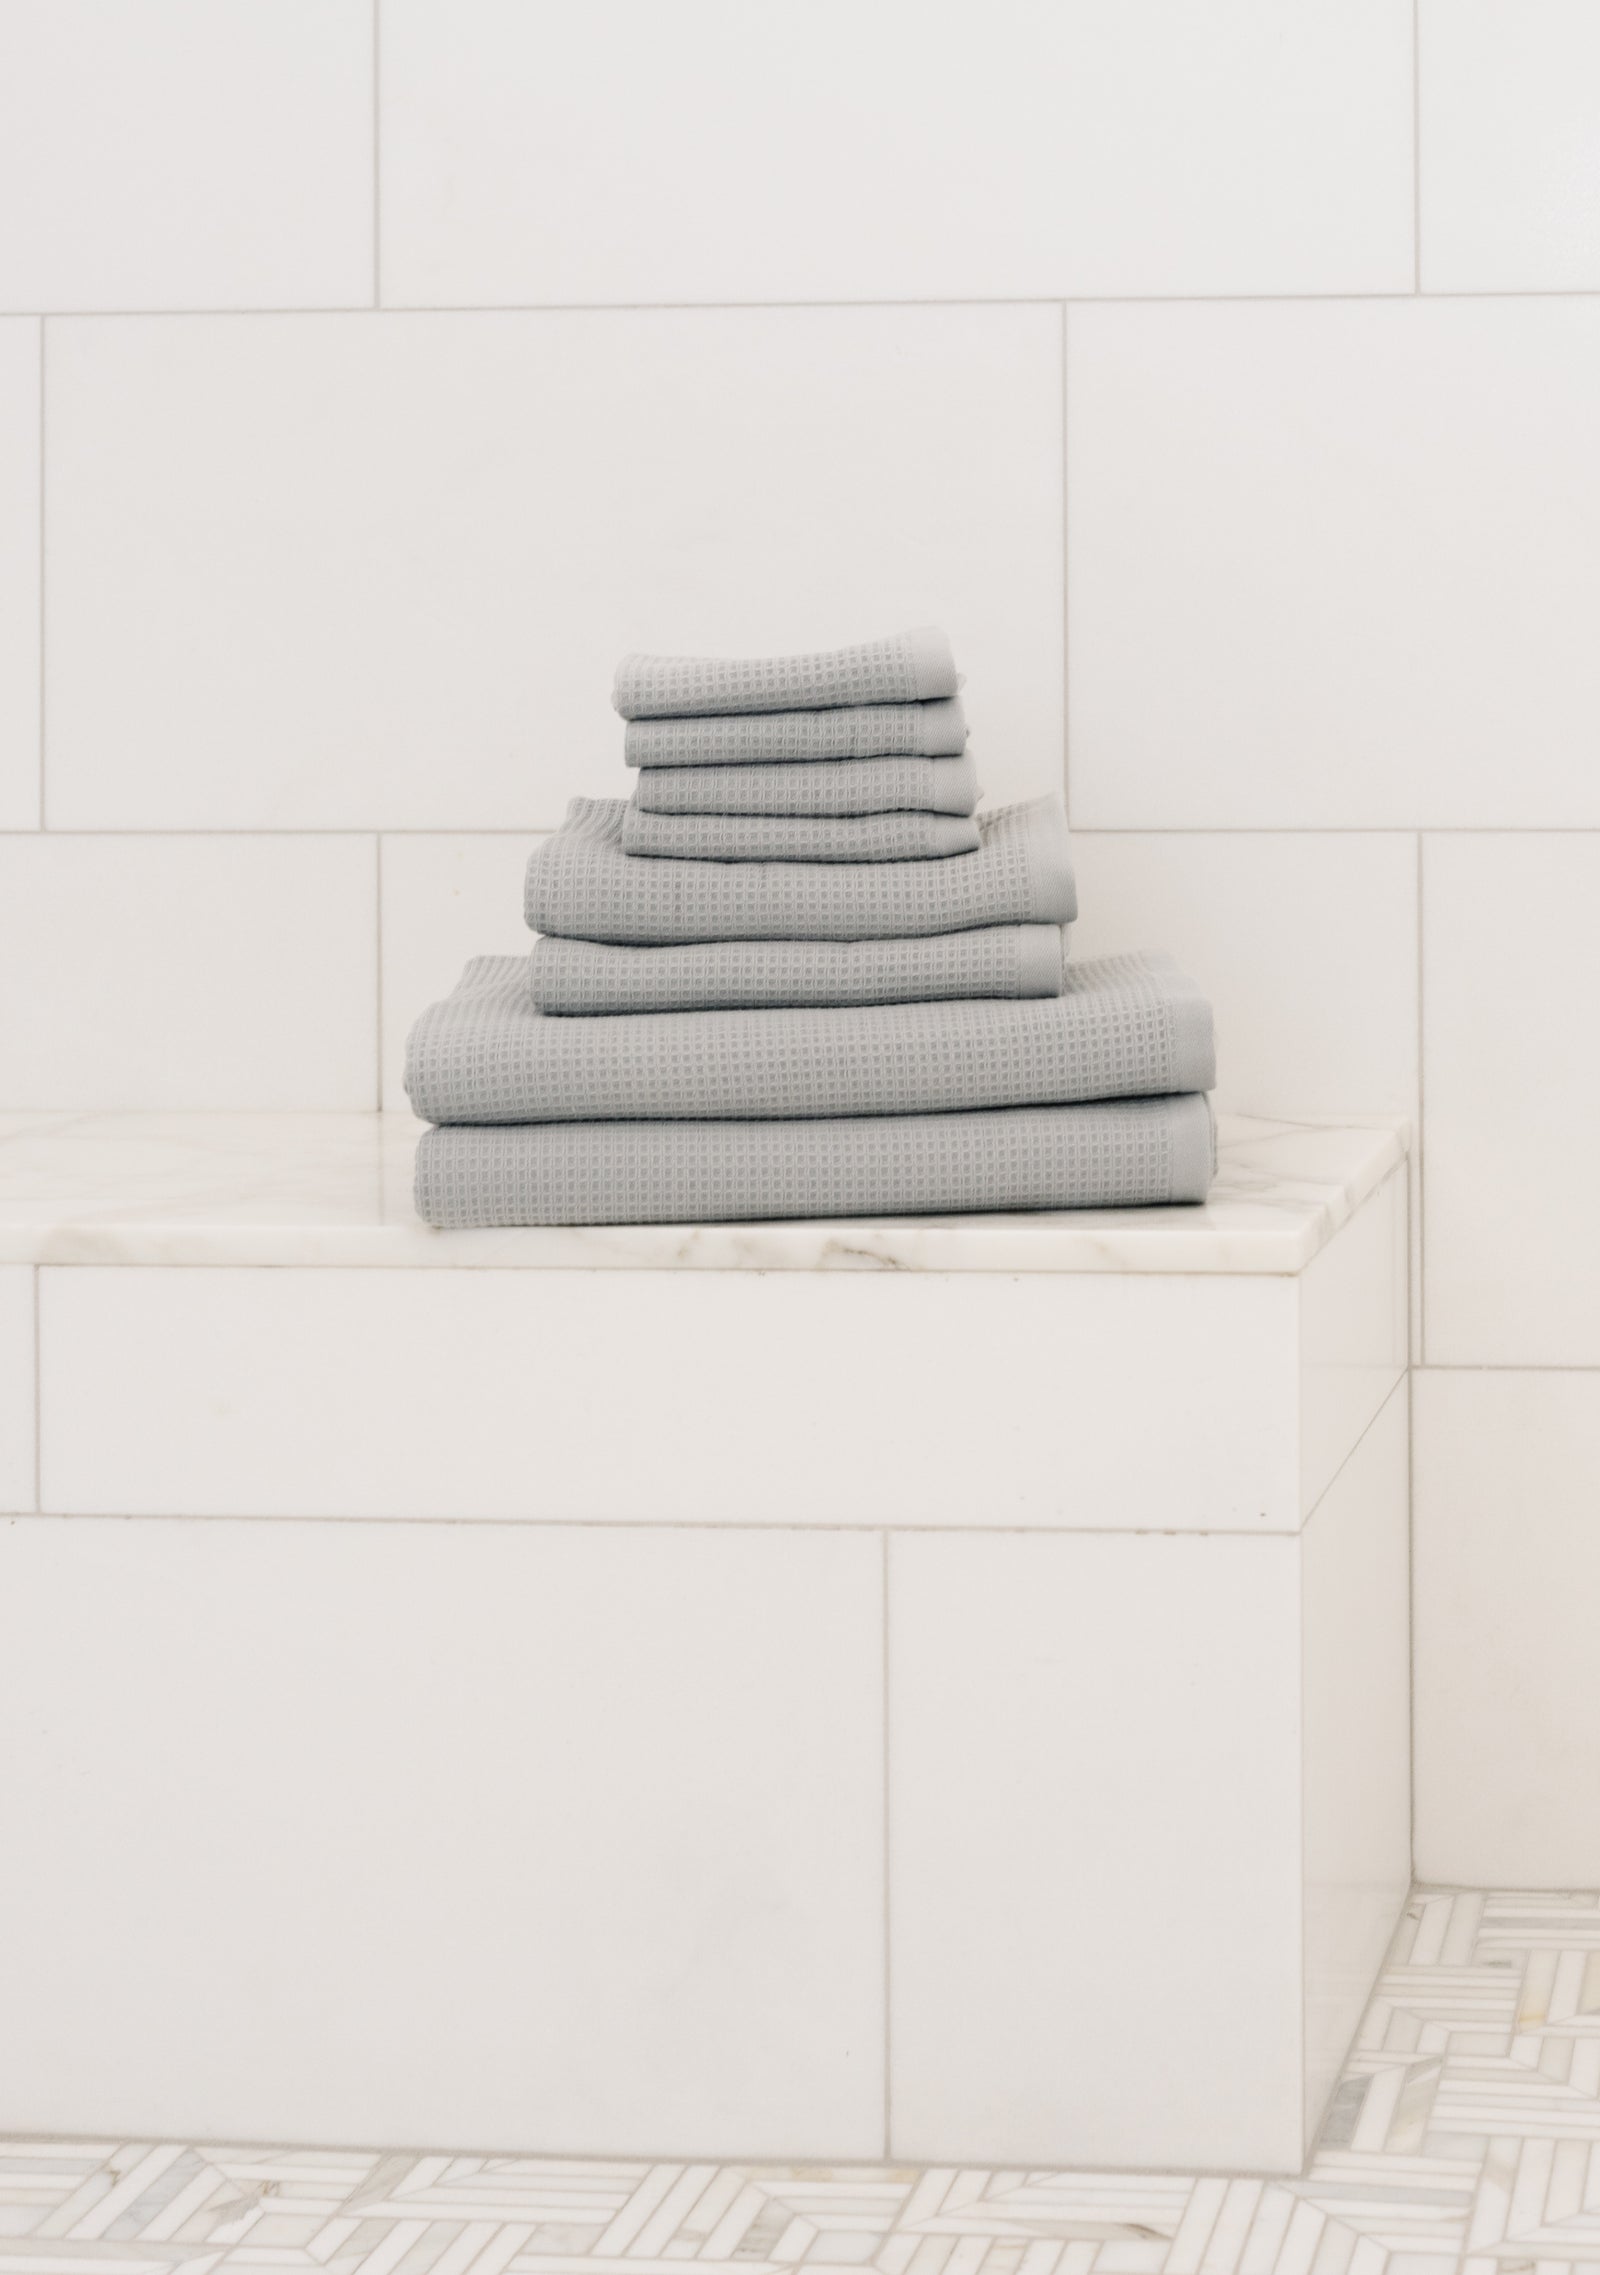 Waffle Bath Towel Set in the color Harbor Mist. Photo of Harbor Mist Waffle Bath Towel Set taken resting on a marble counter top. 